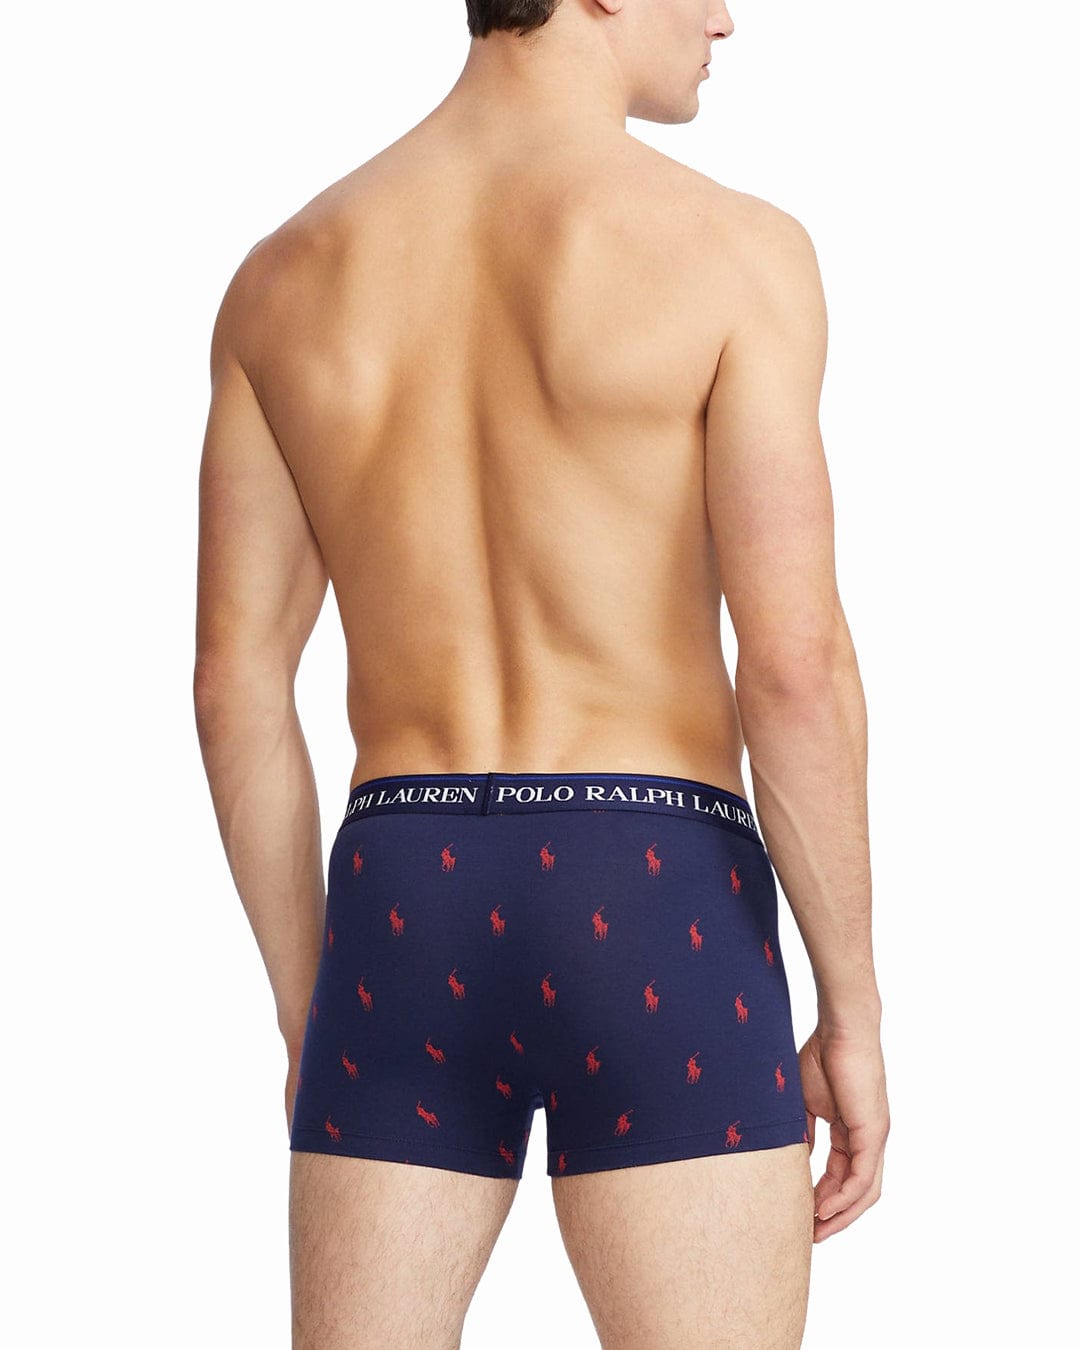 Polo Ralph Lauren Underwear Polo Ralph Lauren Red, Royal Blue And Navy Three-Pack Trunks